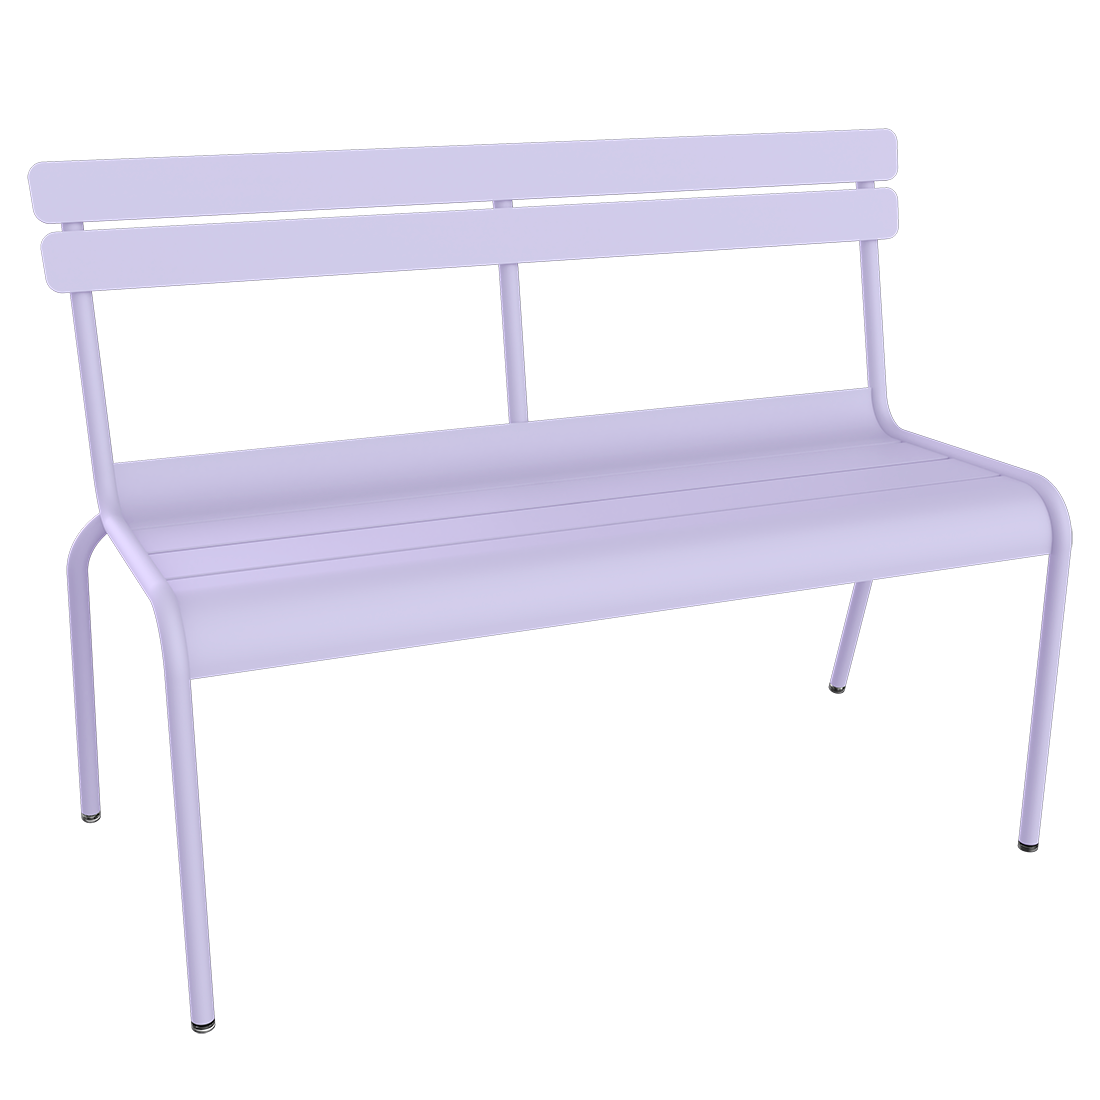 LUXEMBOURG bench with backrest